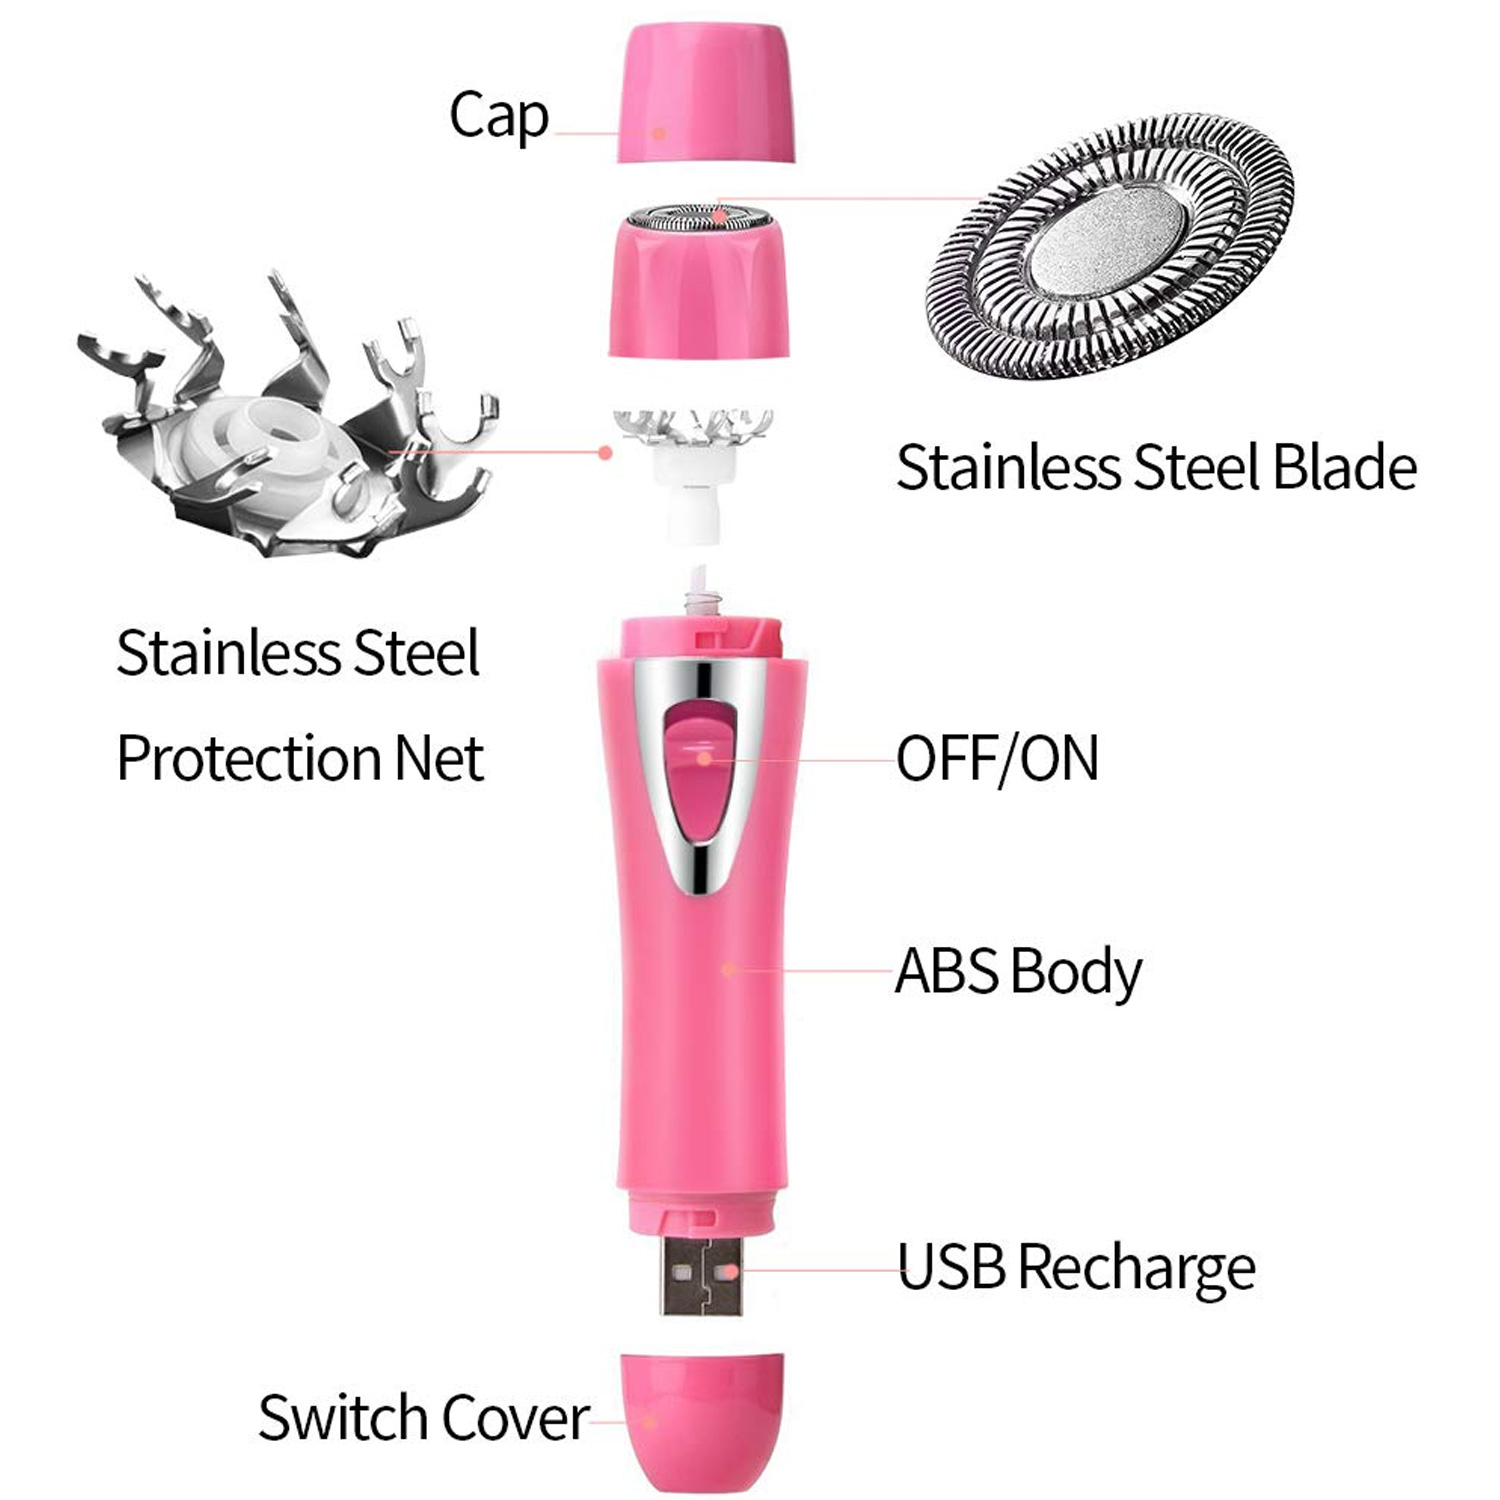 4 in 1 Waterproof And Painless Facial Hair Removal For Women